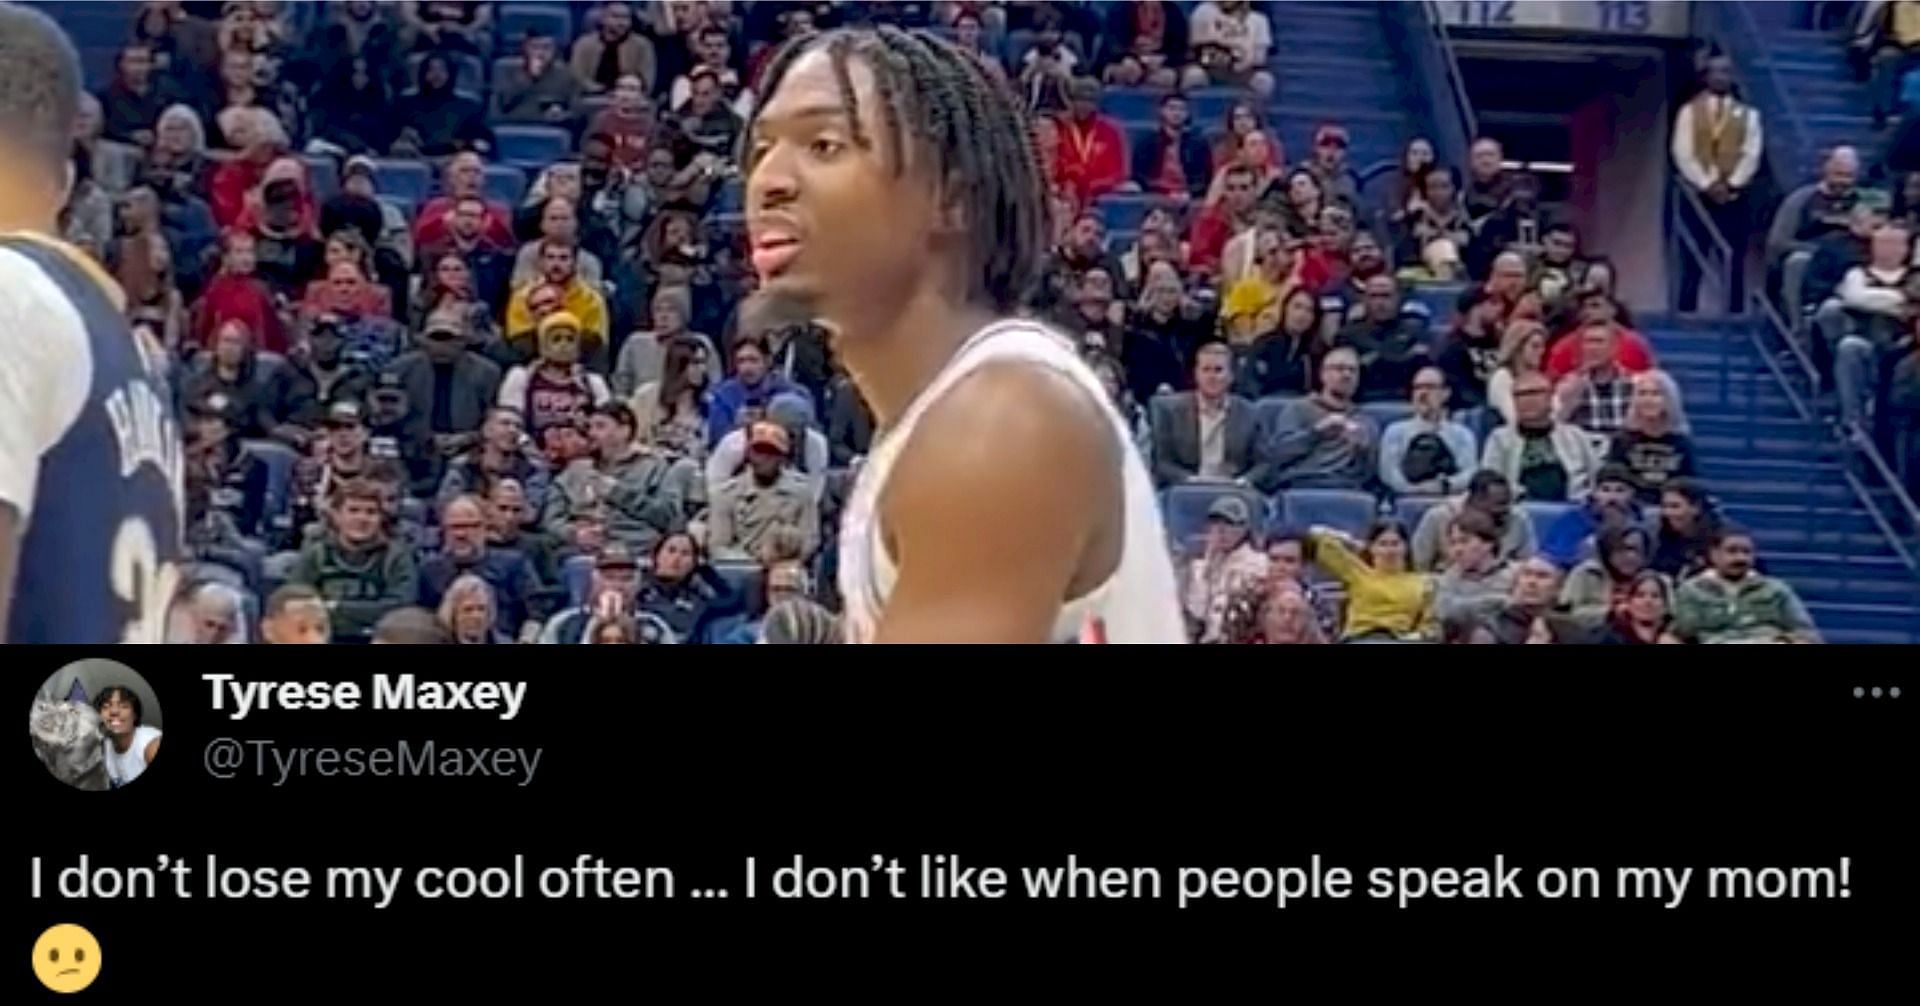 Tyrese Maxey explains the reason behind his confrontation with a courtside heckler.